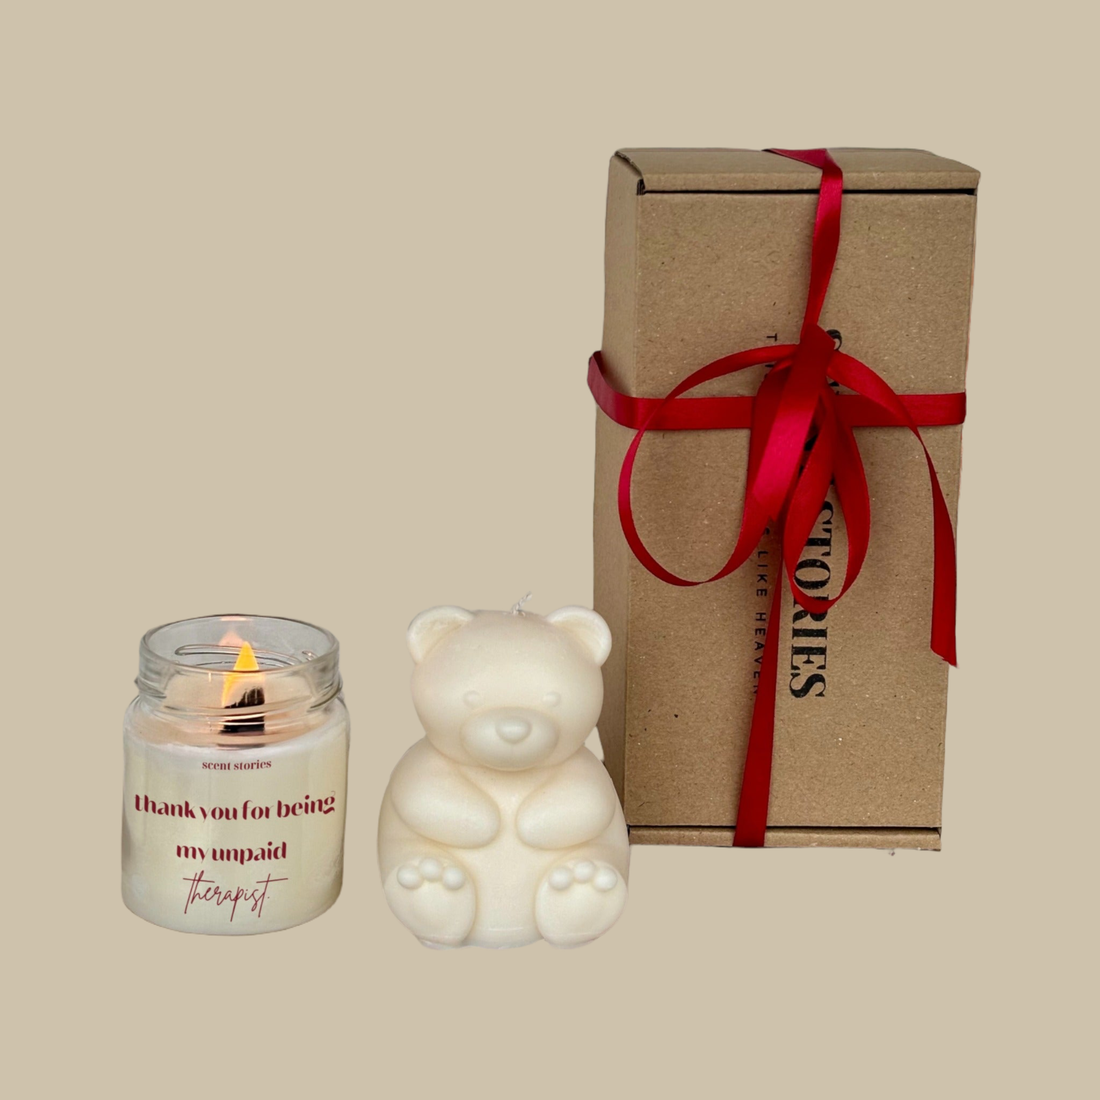 Thank you - Candle Gift Set